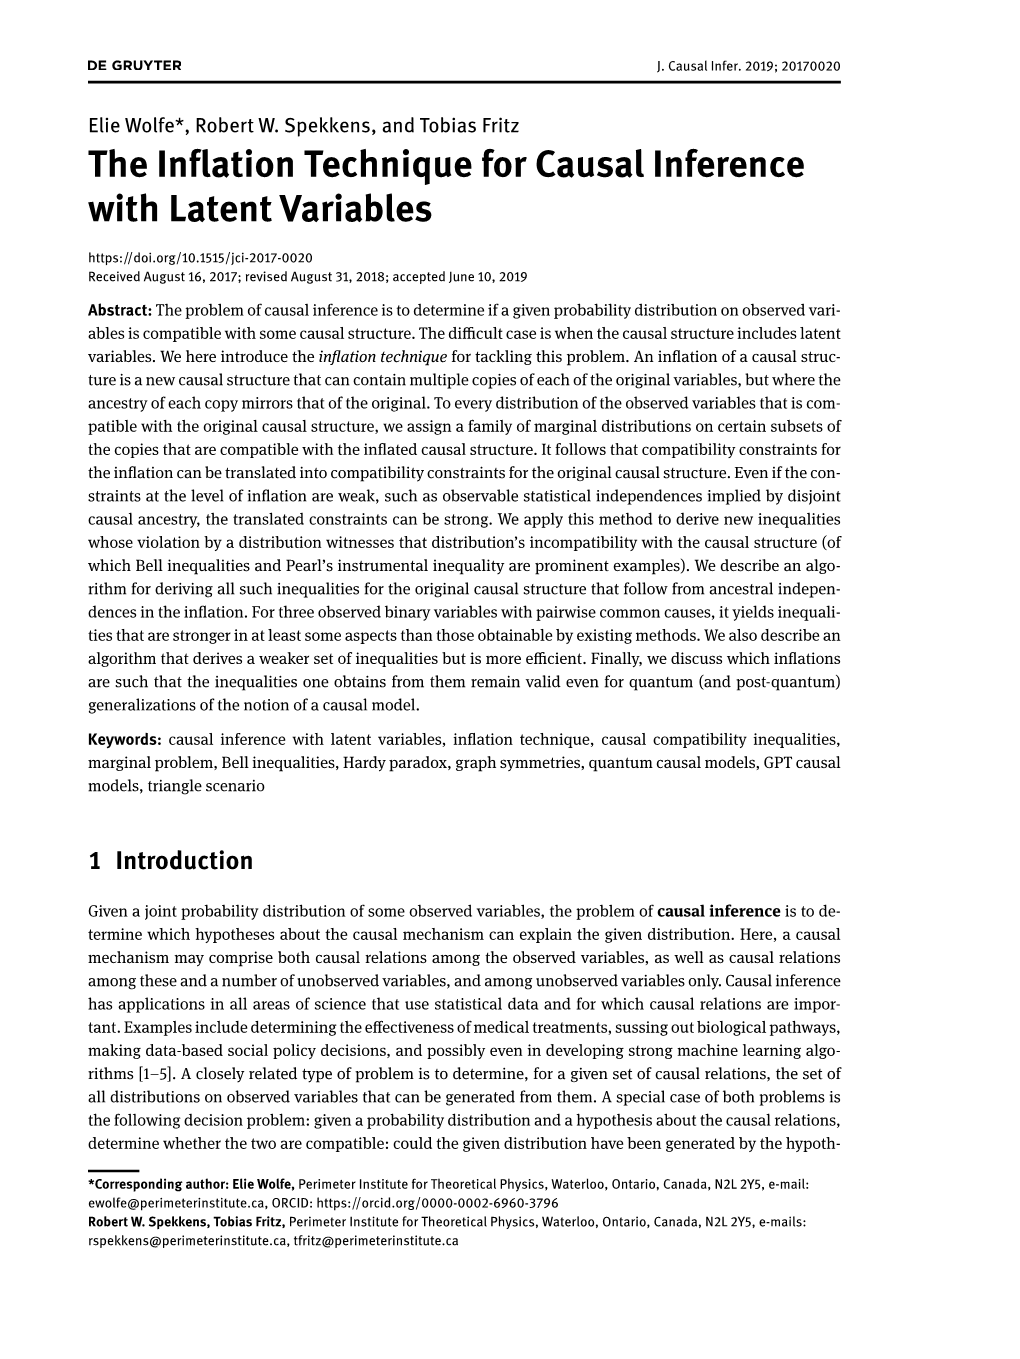 The Inflation Technique for Causal Inference with Latent Variables